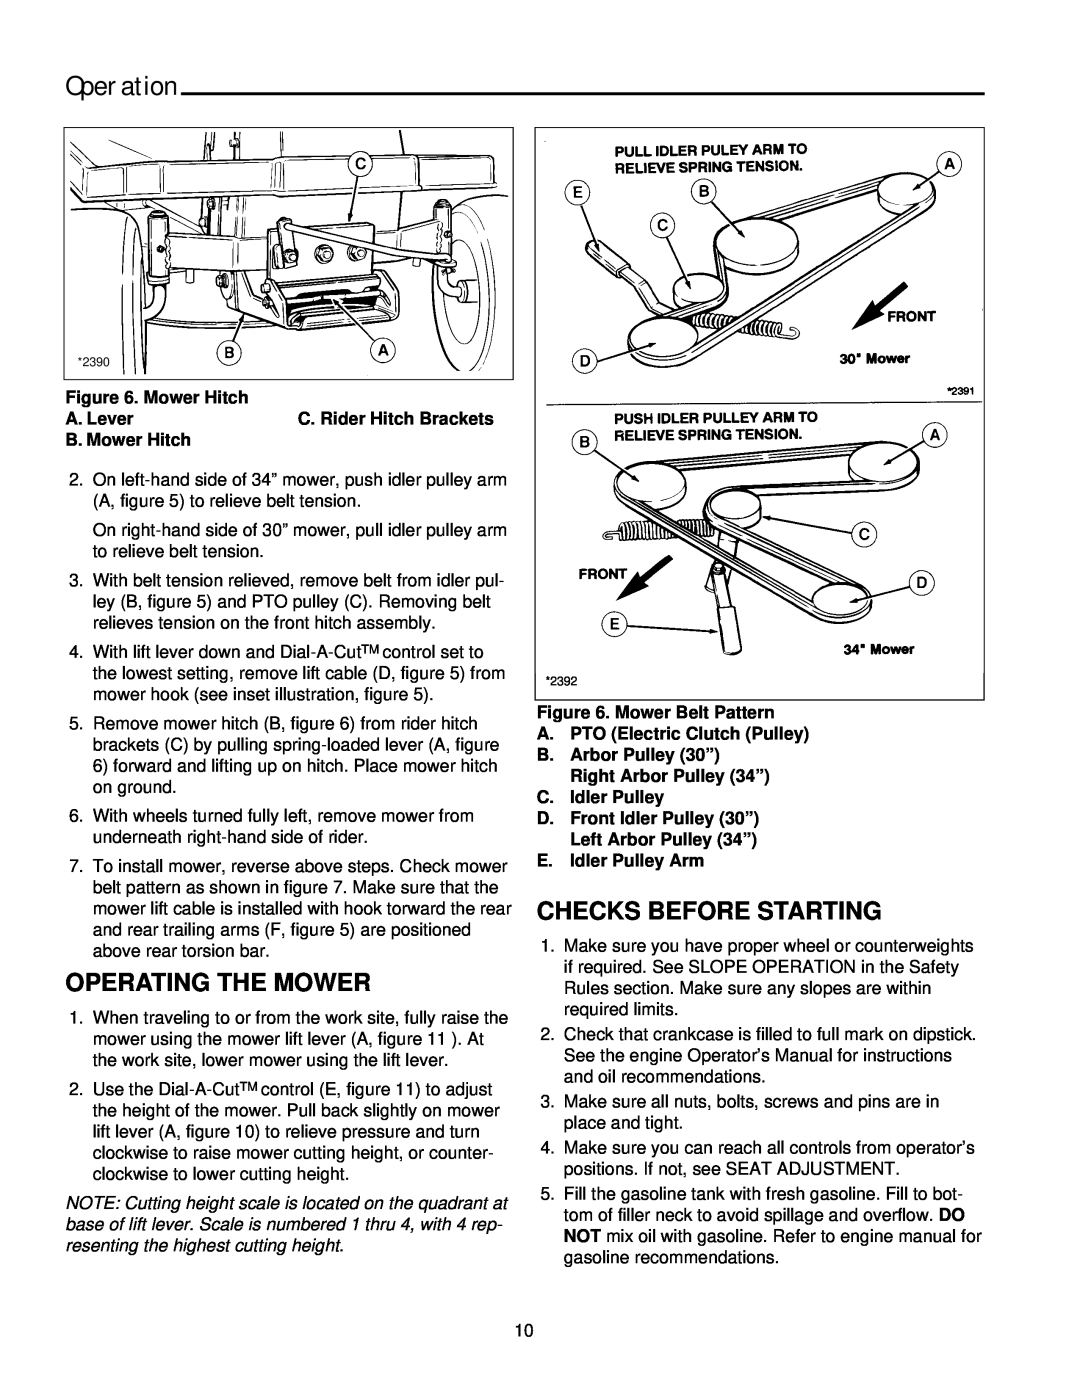 Simplicity 14HP Operating The Mower, Checks Before Starting, Operation, Mower Belt Pattern A. PTO Electric Clutch Pulley 